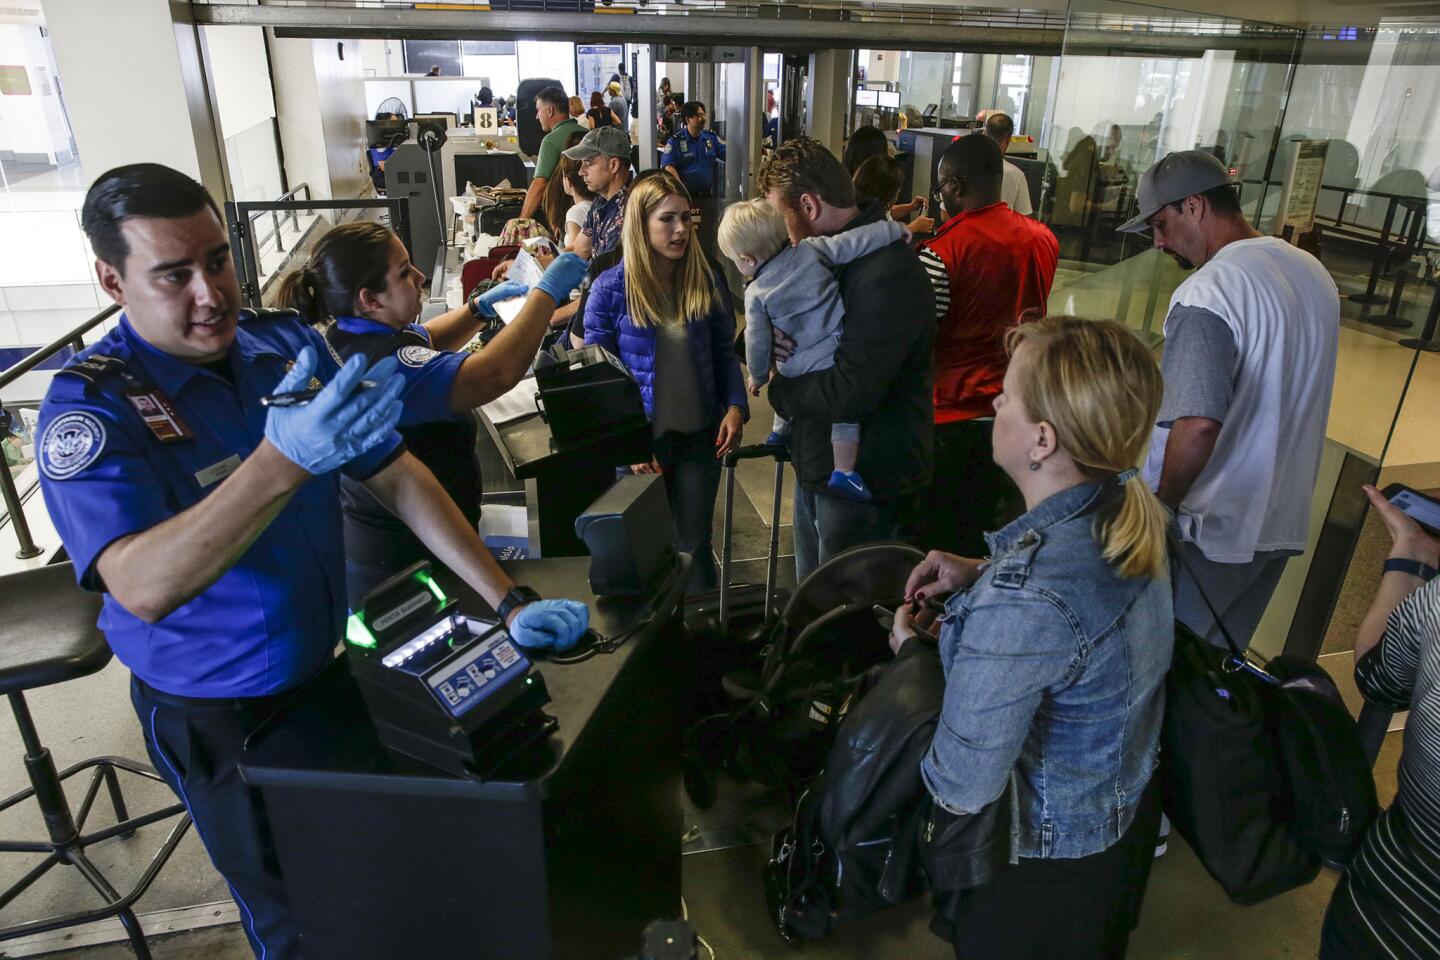 Memorial Day weekend travelers line up at a TSA checkpoint at the United Airlines Terminal at LAX.